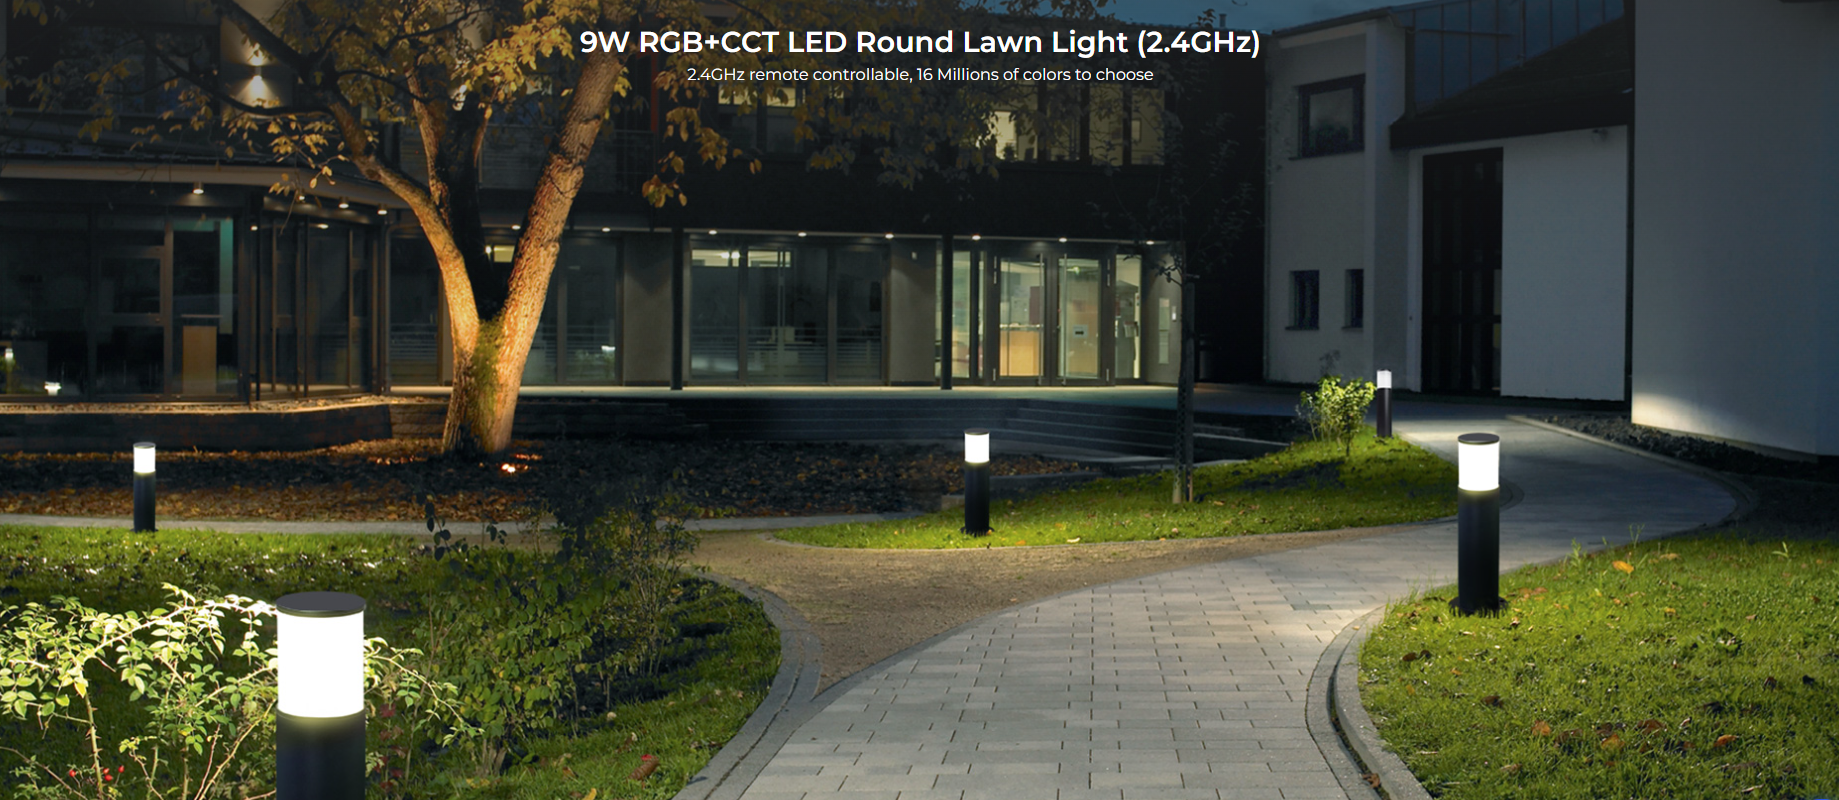 9W RGB+CCT LED Round Lawn Light (2.4GHz) 2.4GHz remote controllable, 16 Million colours to choose